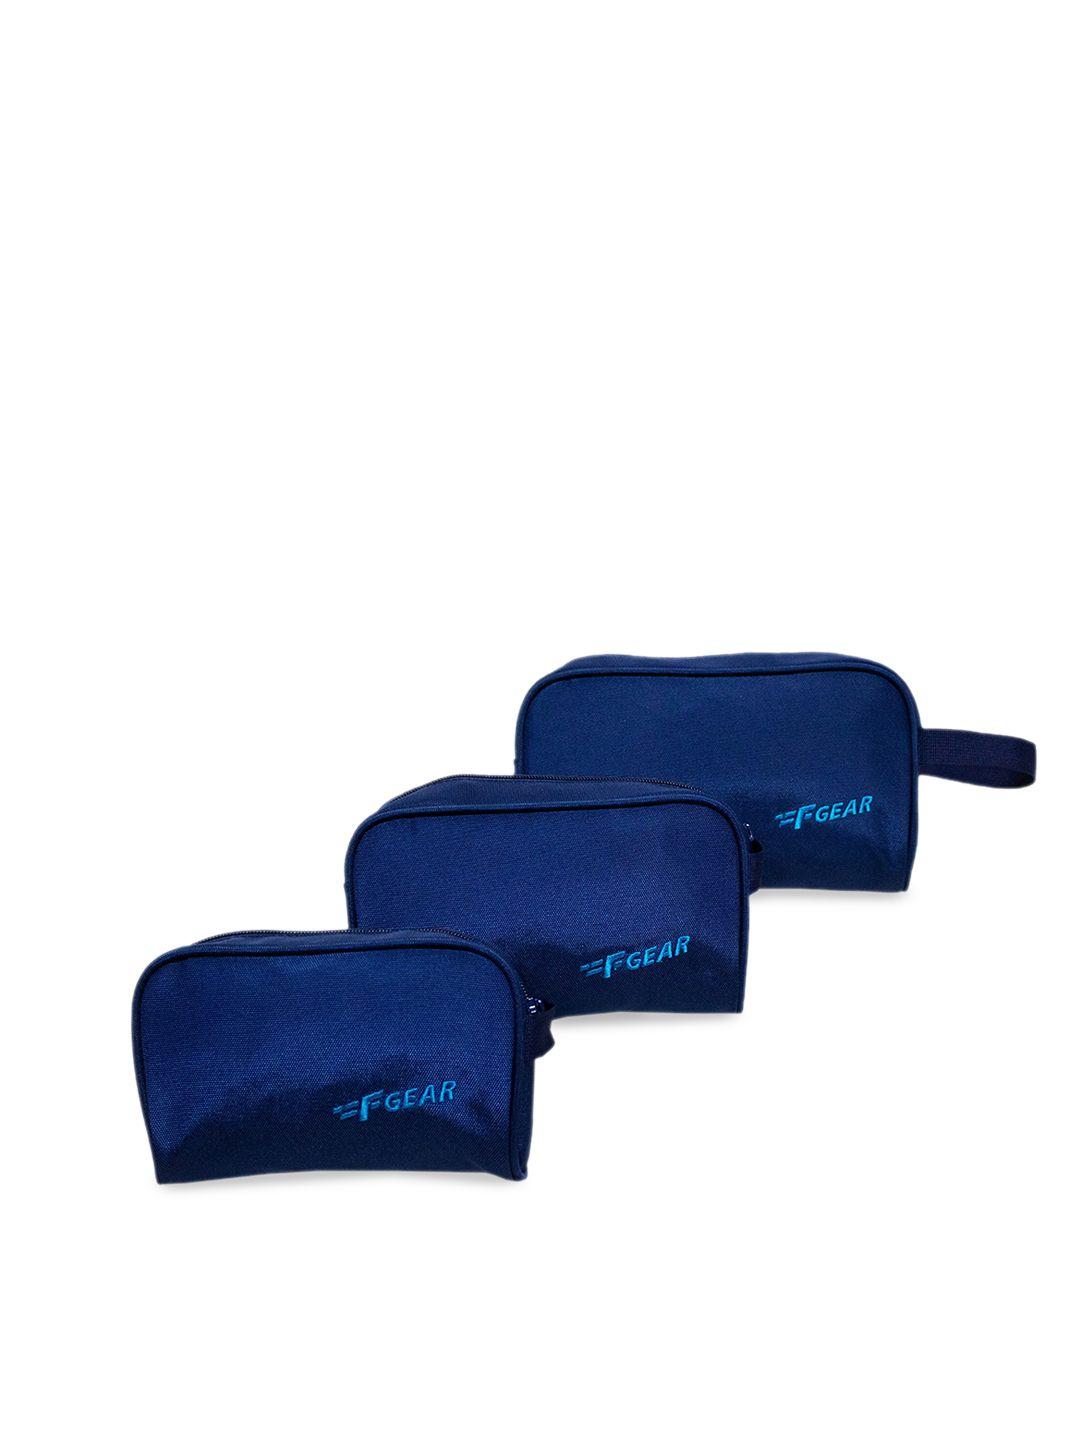 f gear set of 3 navy blue solid travel pouches